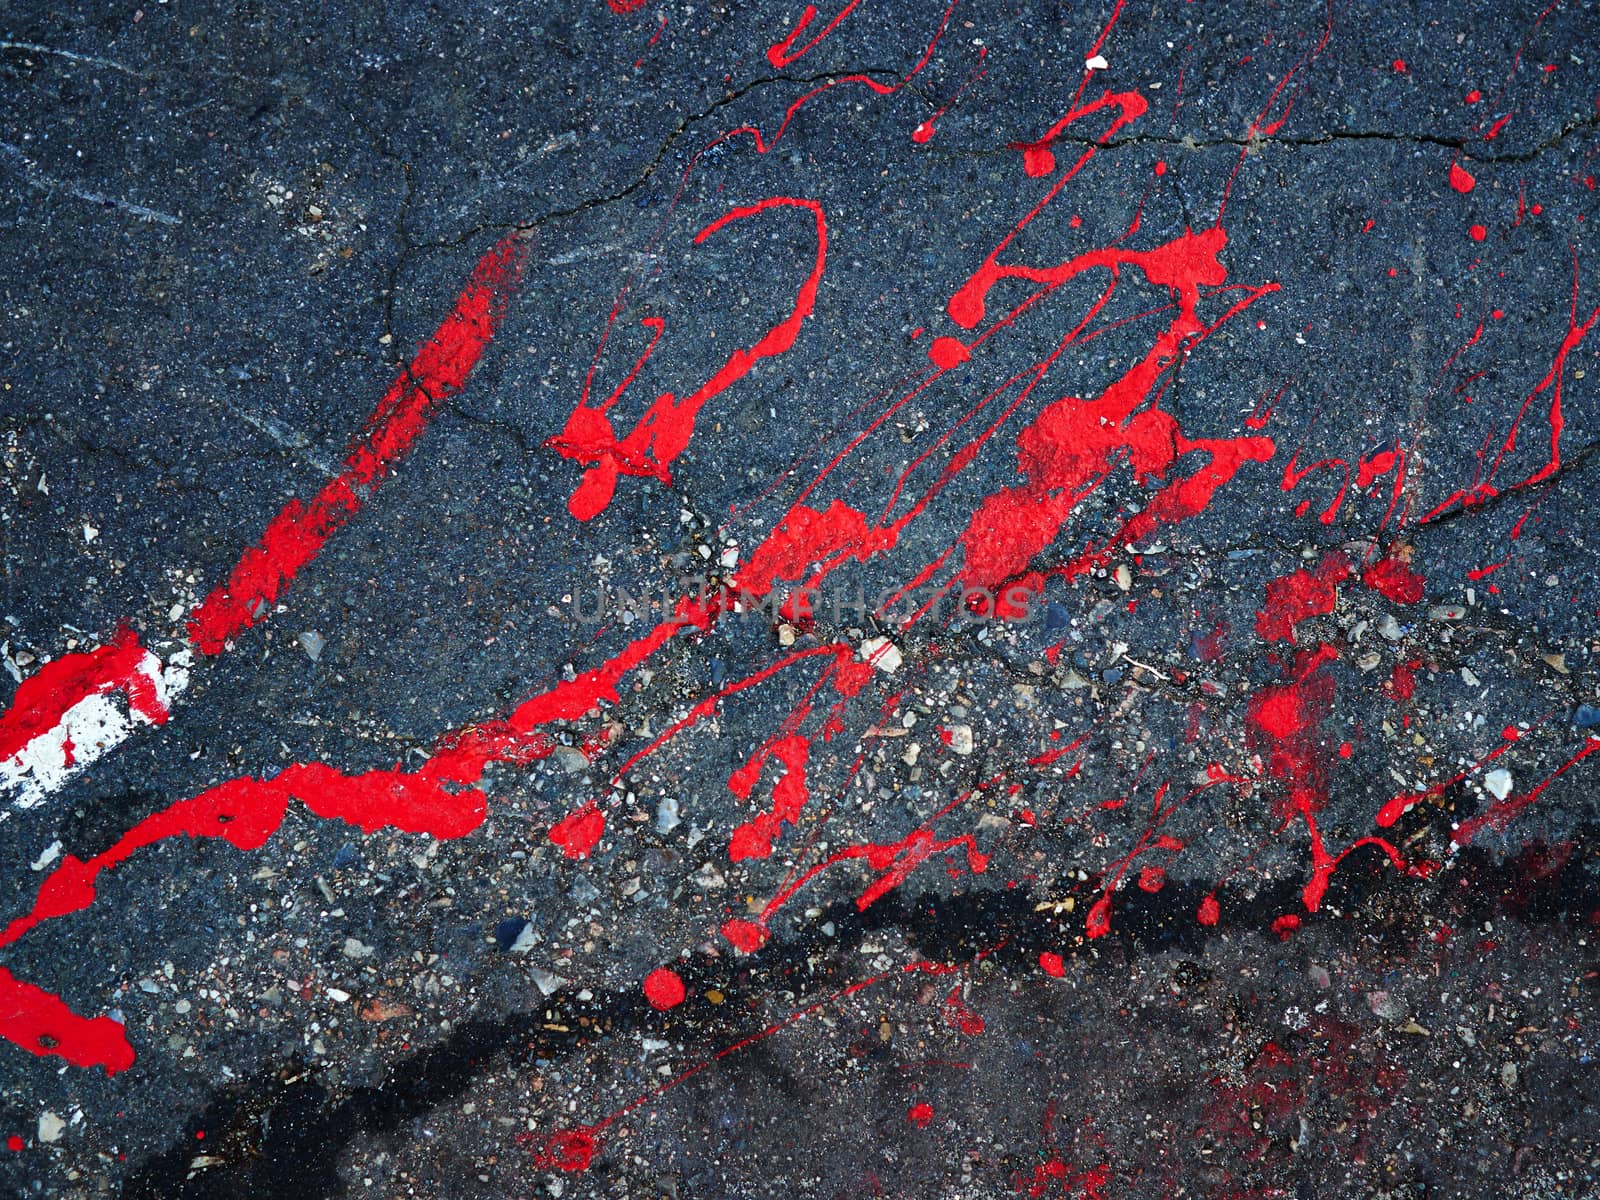 Drops of red paint stain on the asphalt by Ronyzmbow